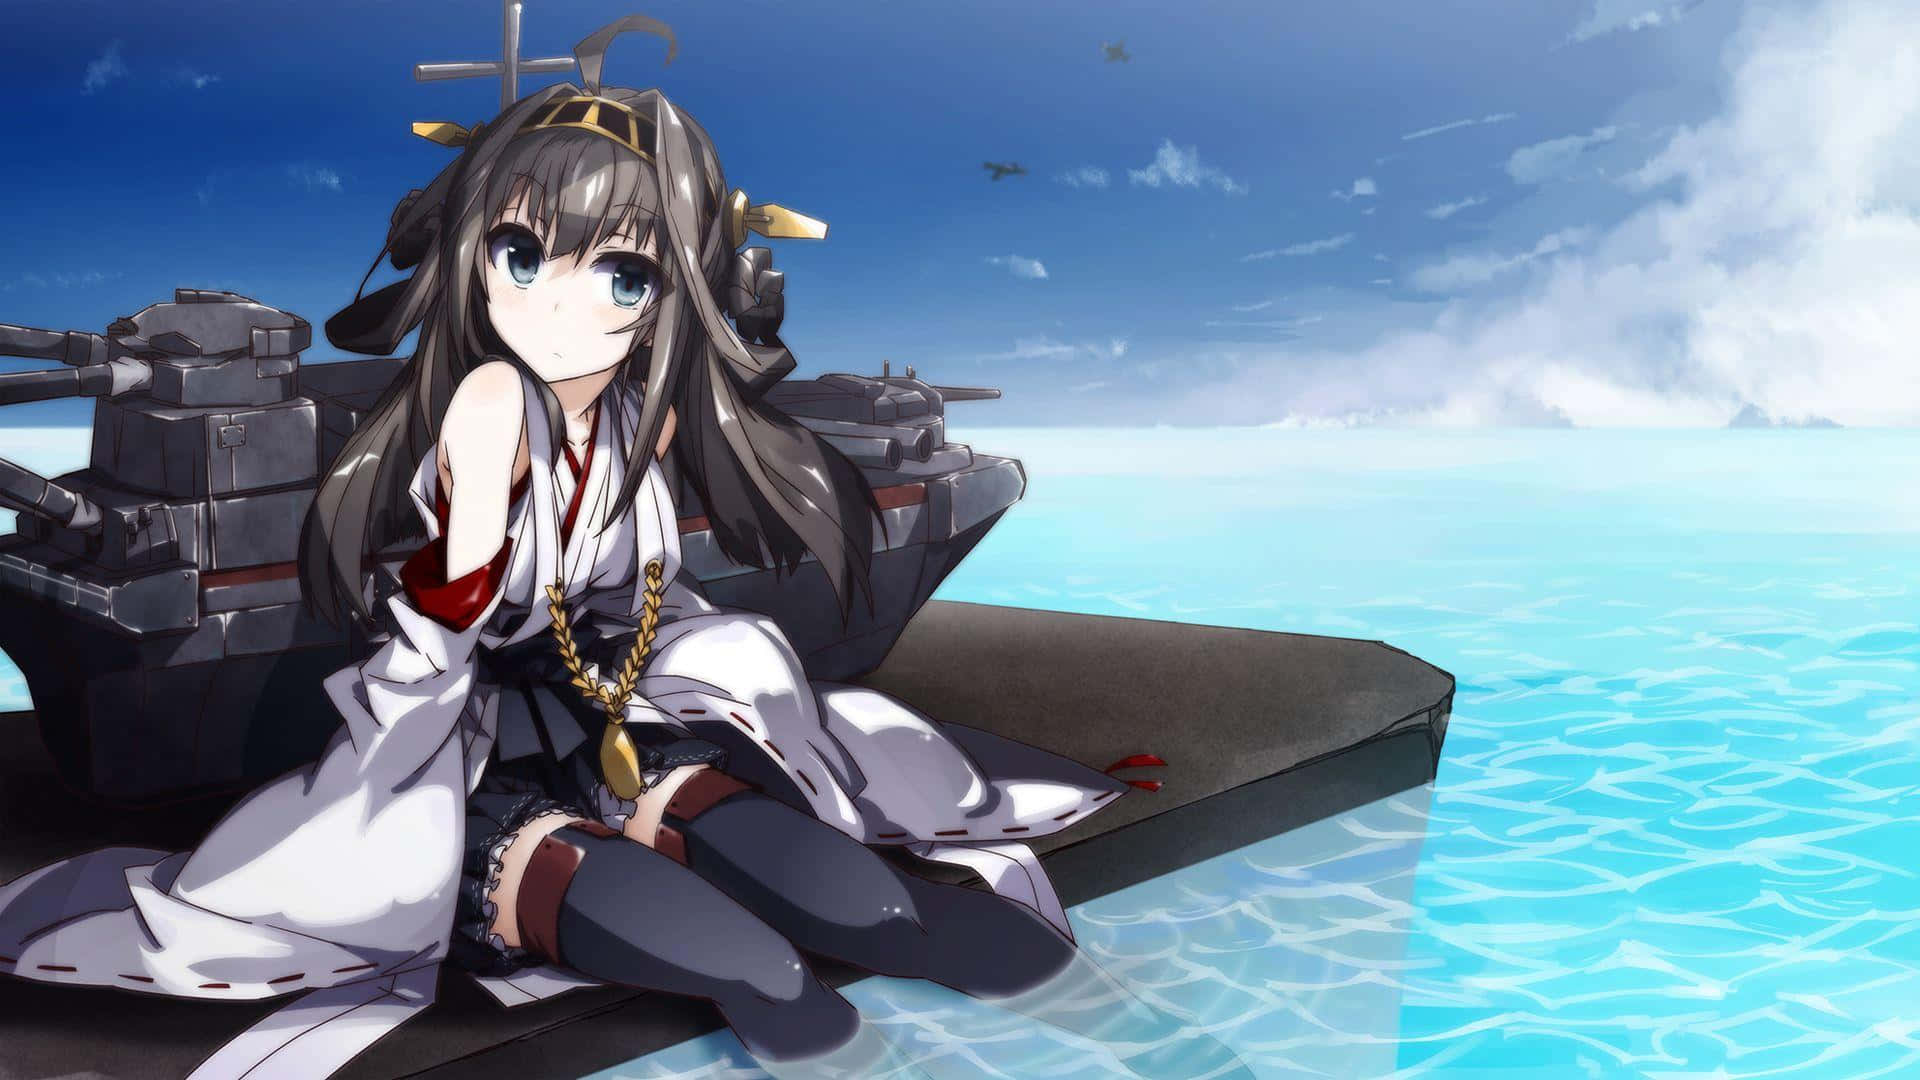 Join The Kancolle Navy And Protect The Seas! Wallpaper